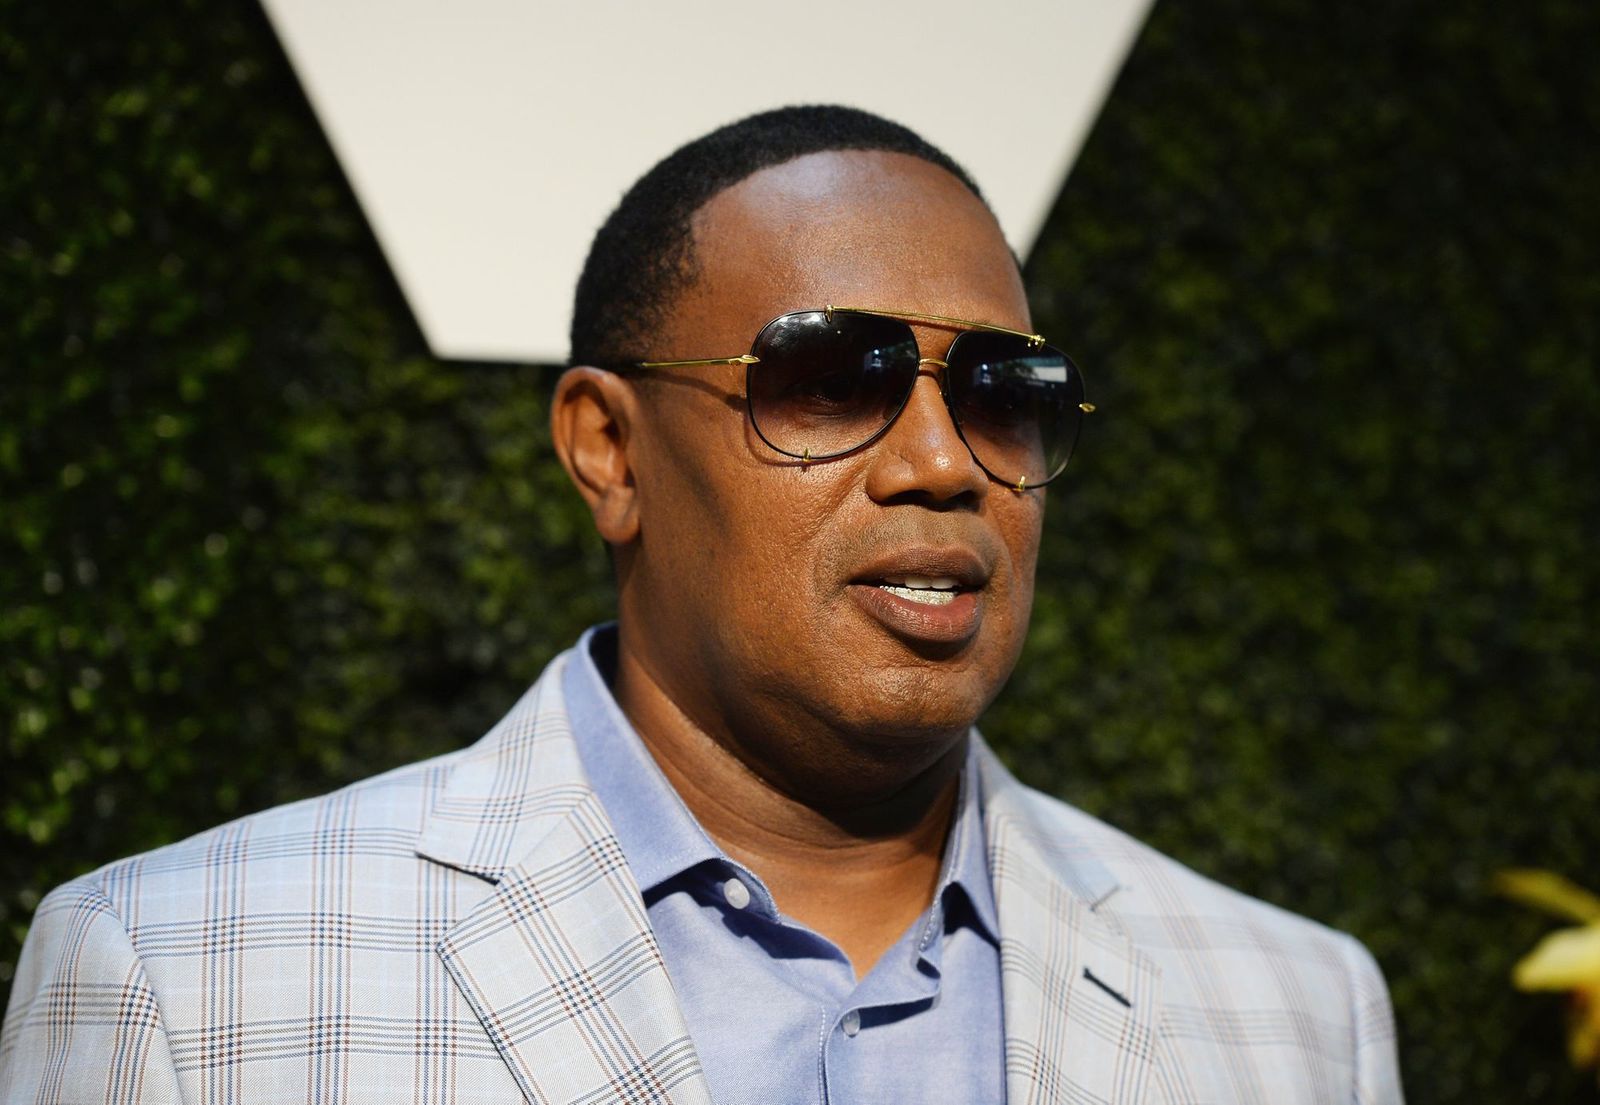 Master P in talks to purchase Reebok for $2.4B